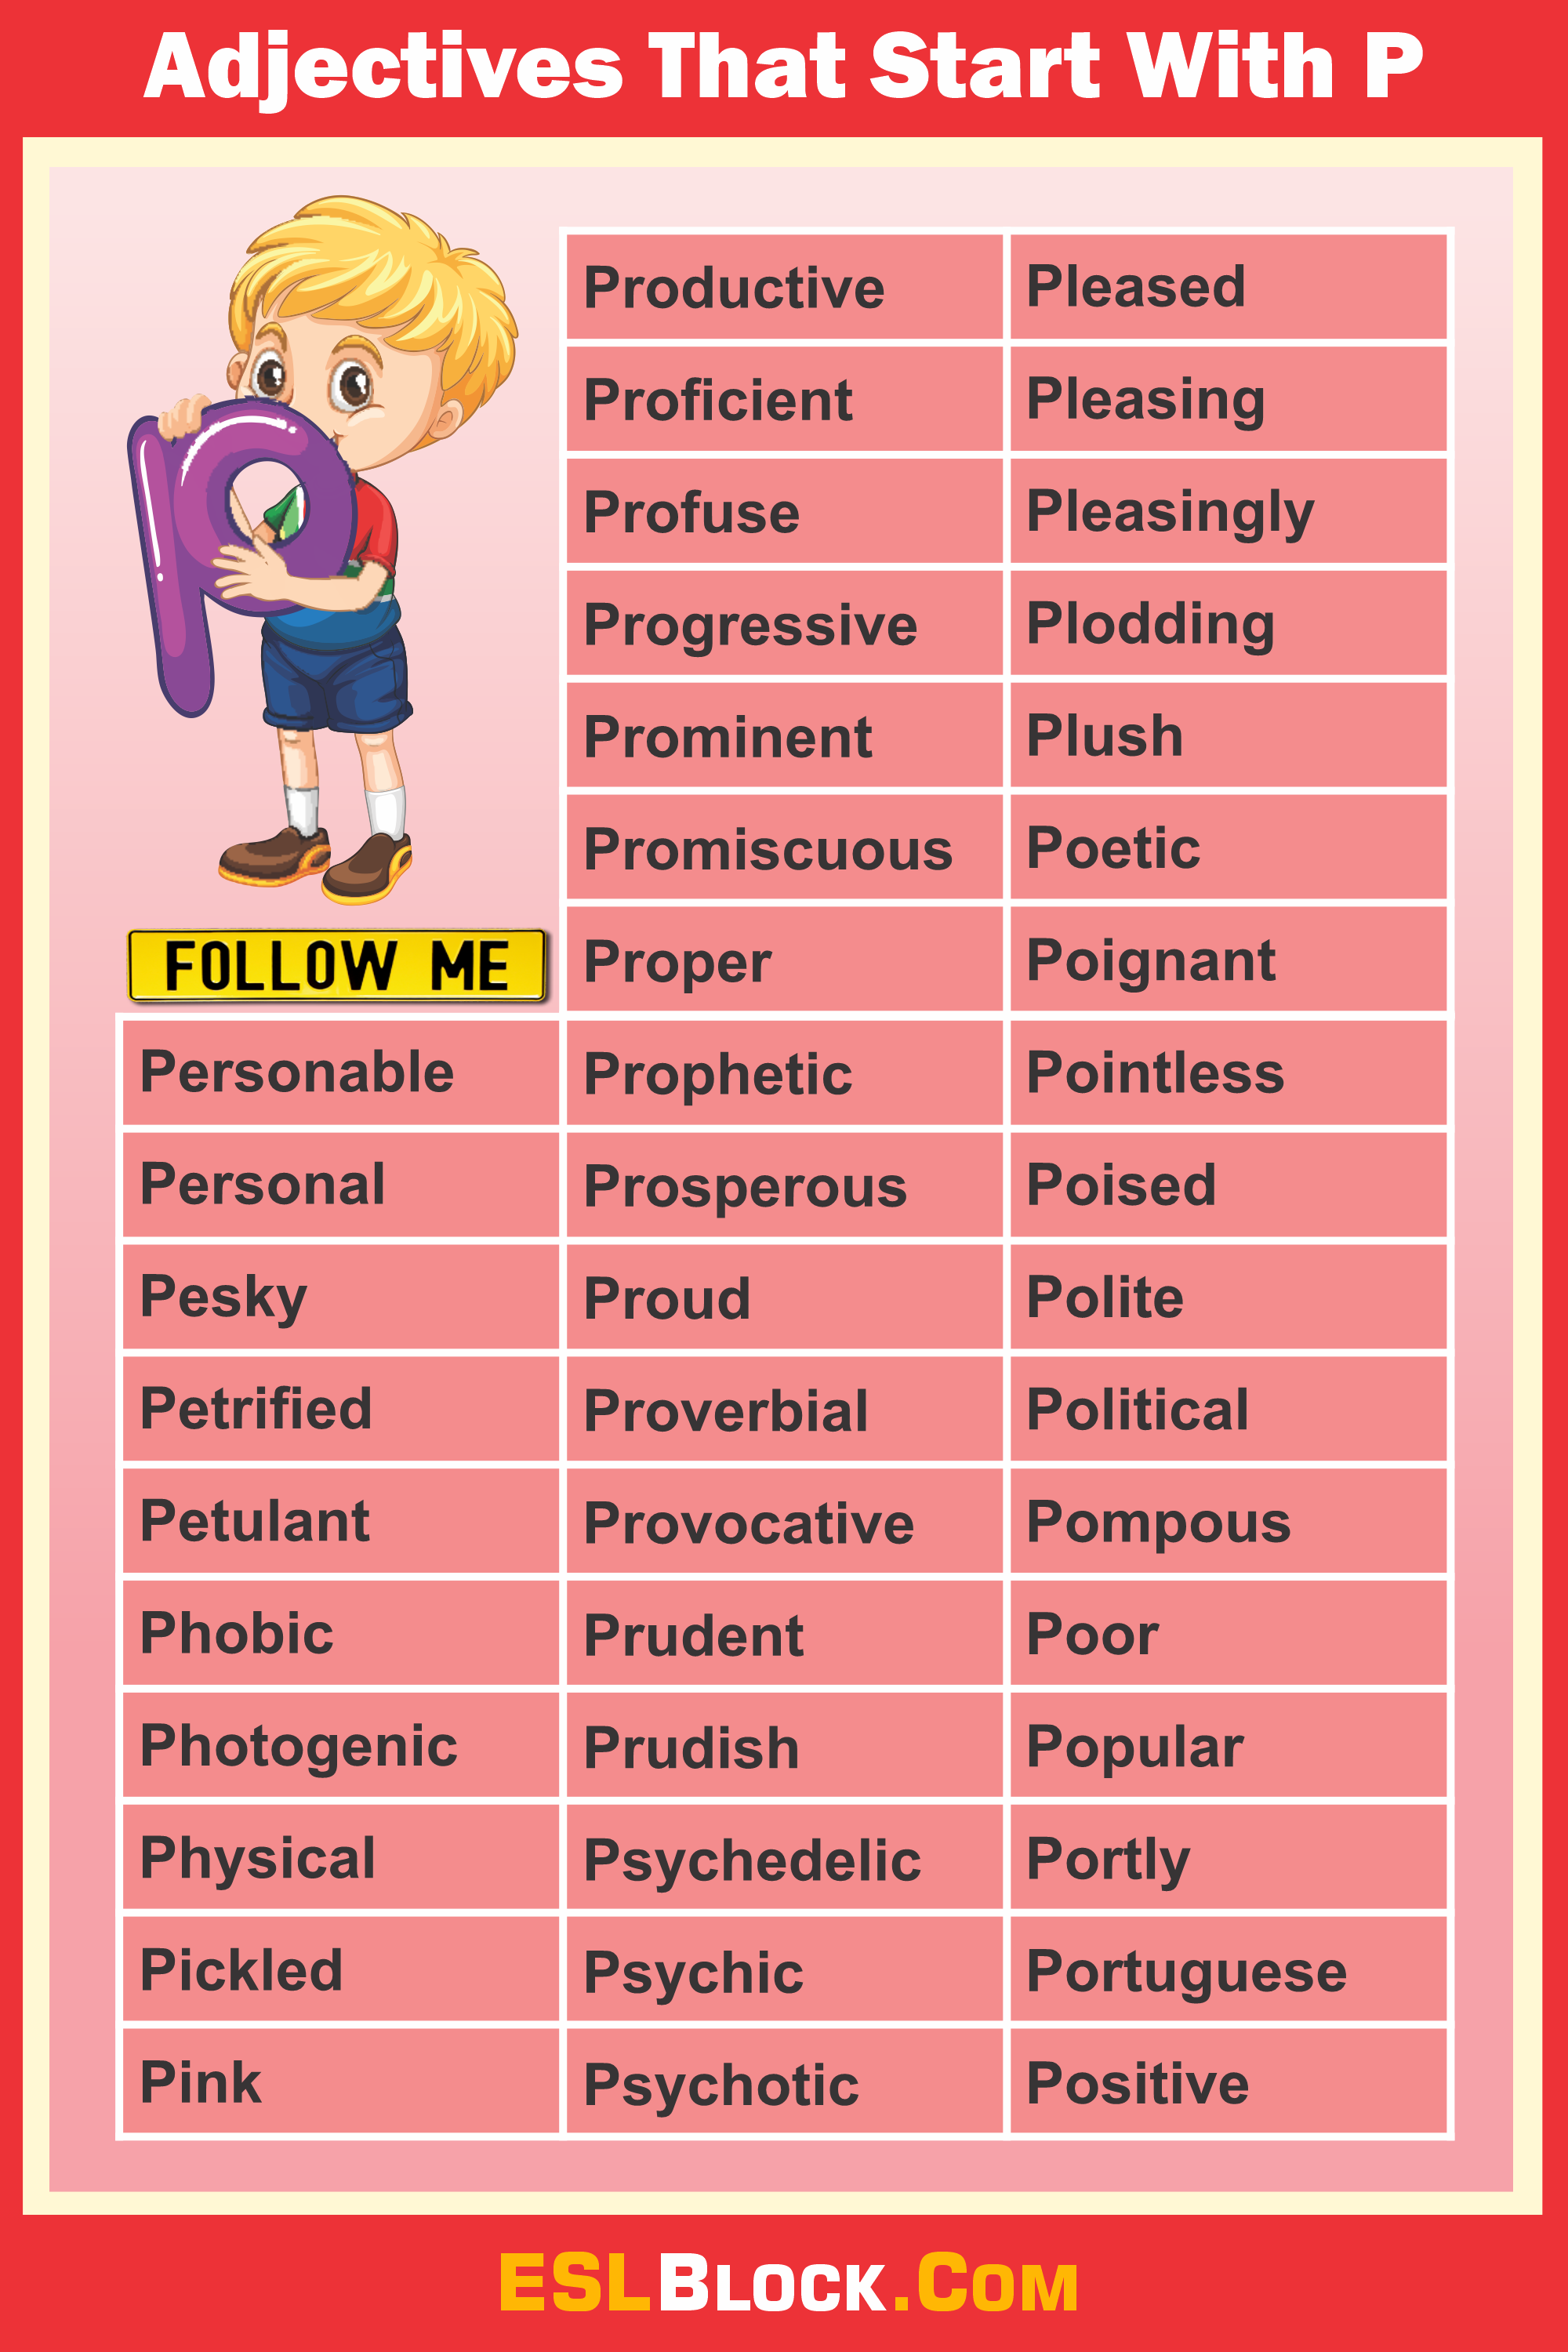 A-Z Adjectives, Adjective Words, Adjectives, P Words, Vocabulary, Words That Describe a Person, Adjectives that start with P, Descriptive words that start with P